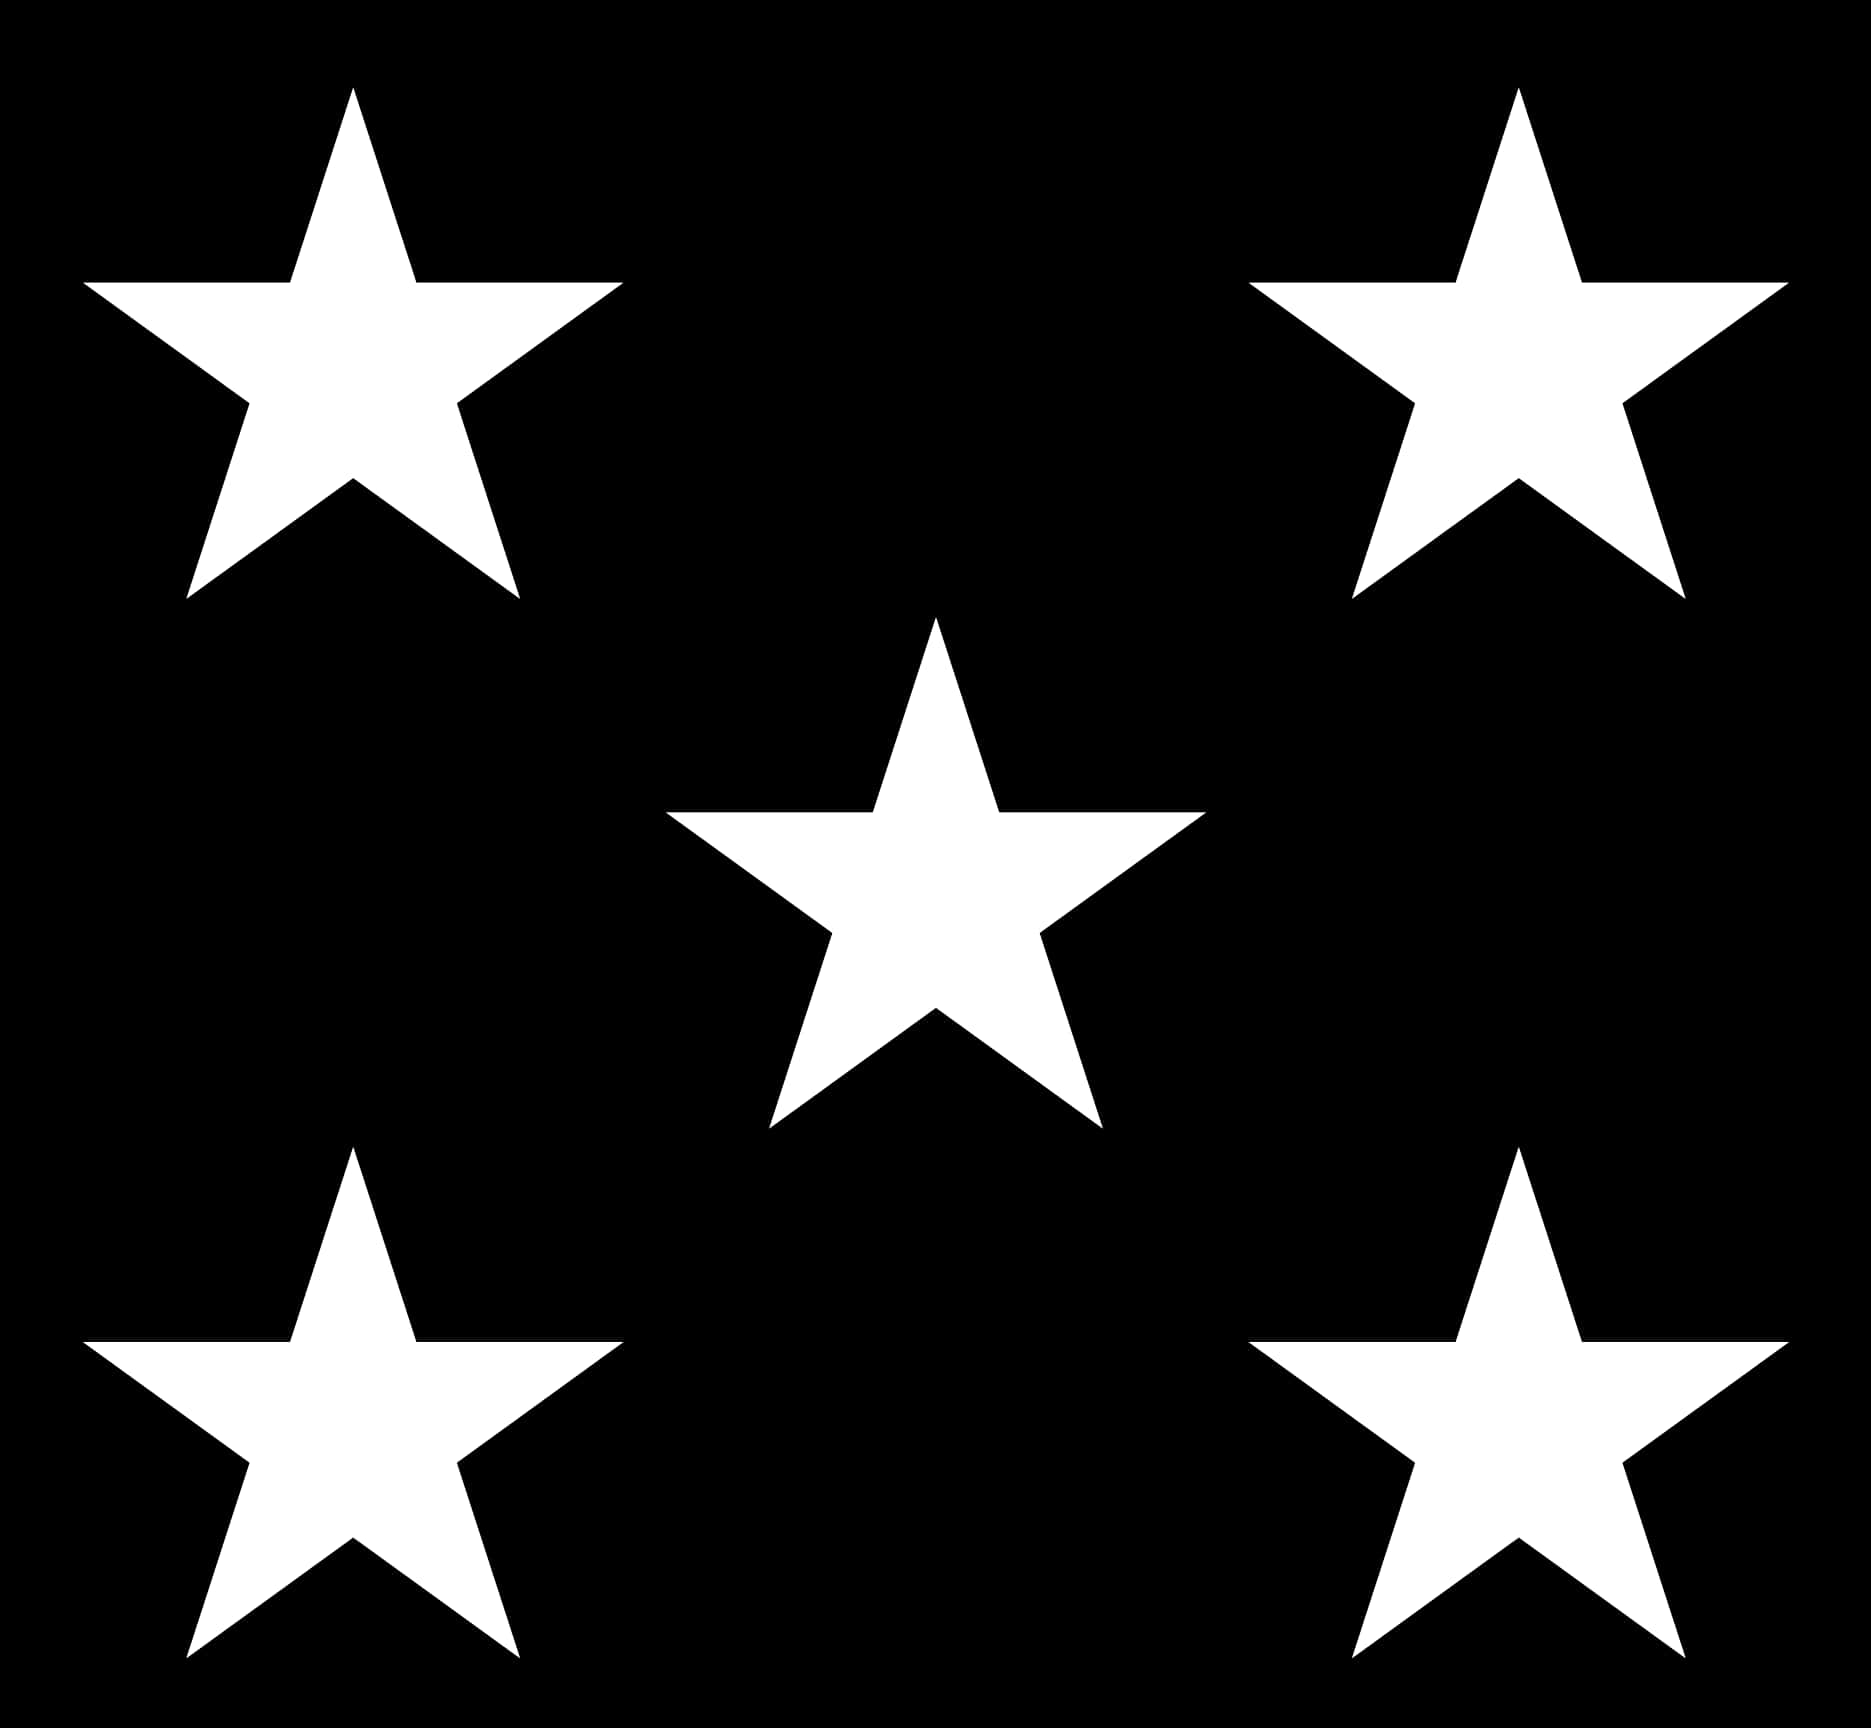 A Group Of White Stars On A Black Background